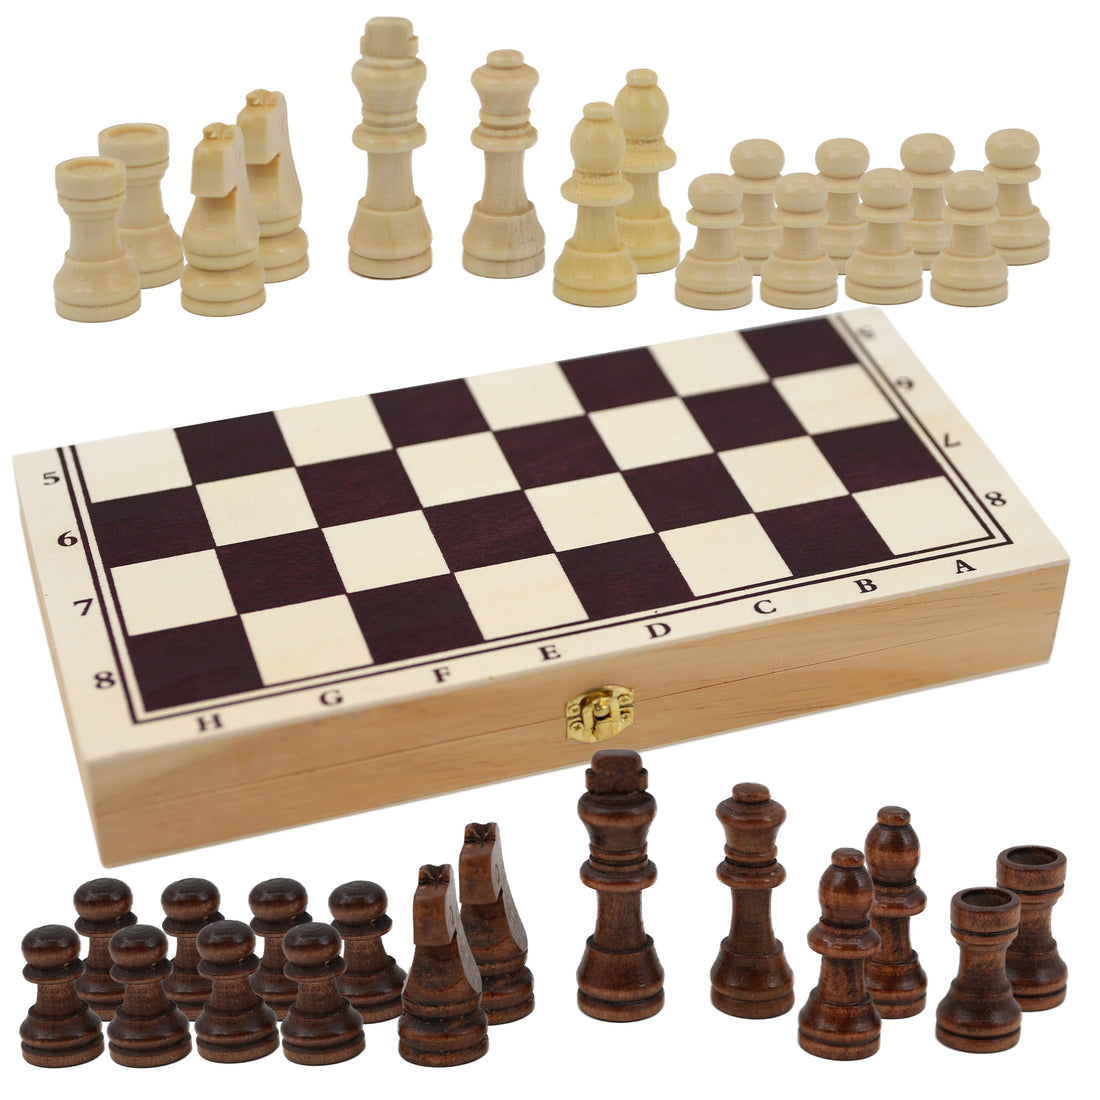 Mts Game 3 In 1 Wooden Compendium Board Game Set 36814970454238 ?v=1666825565&width=1100